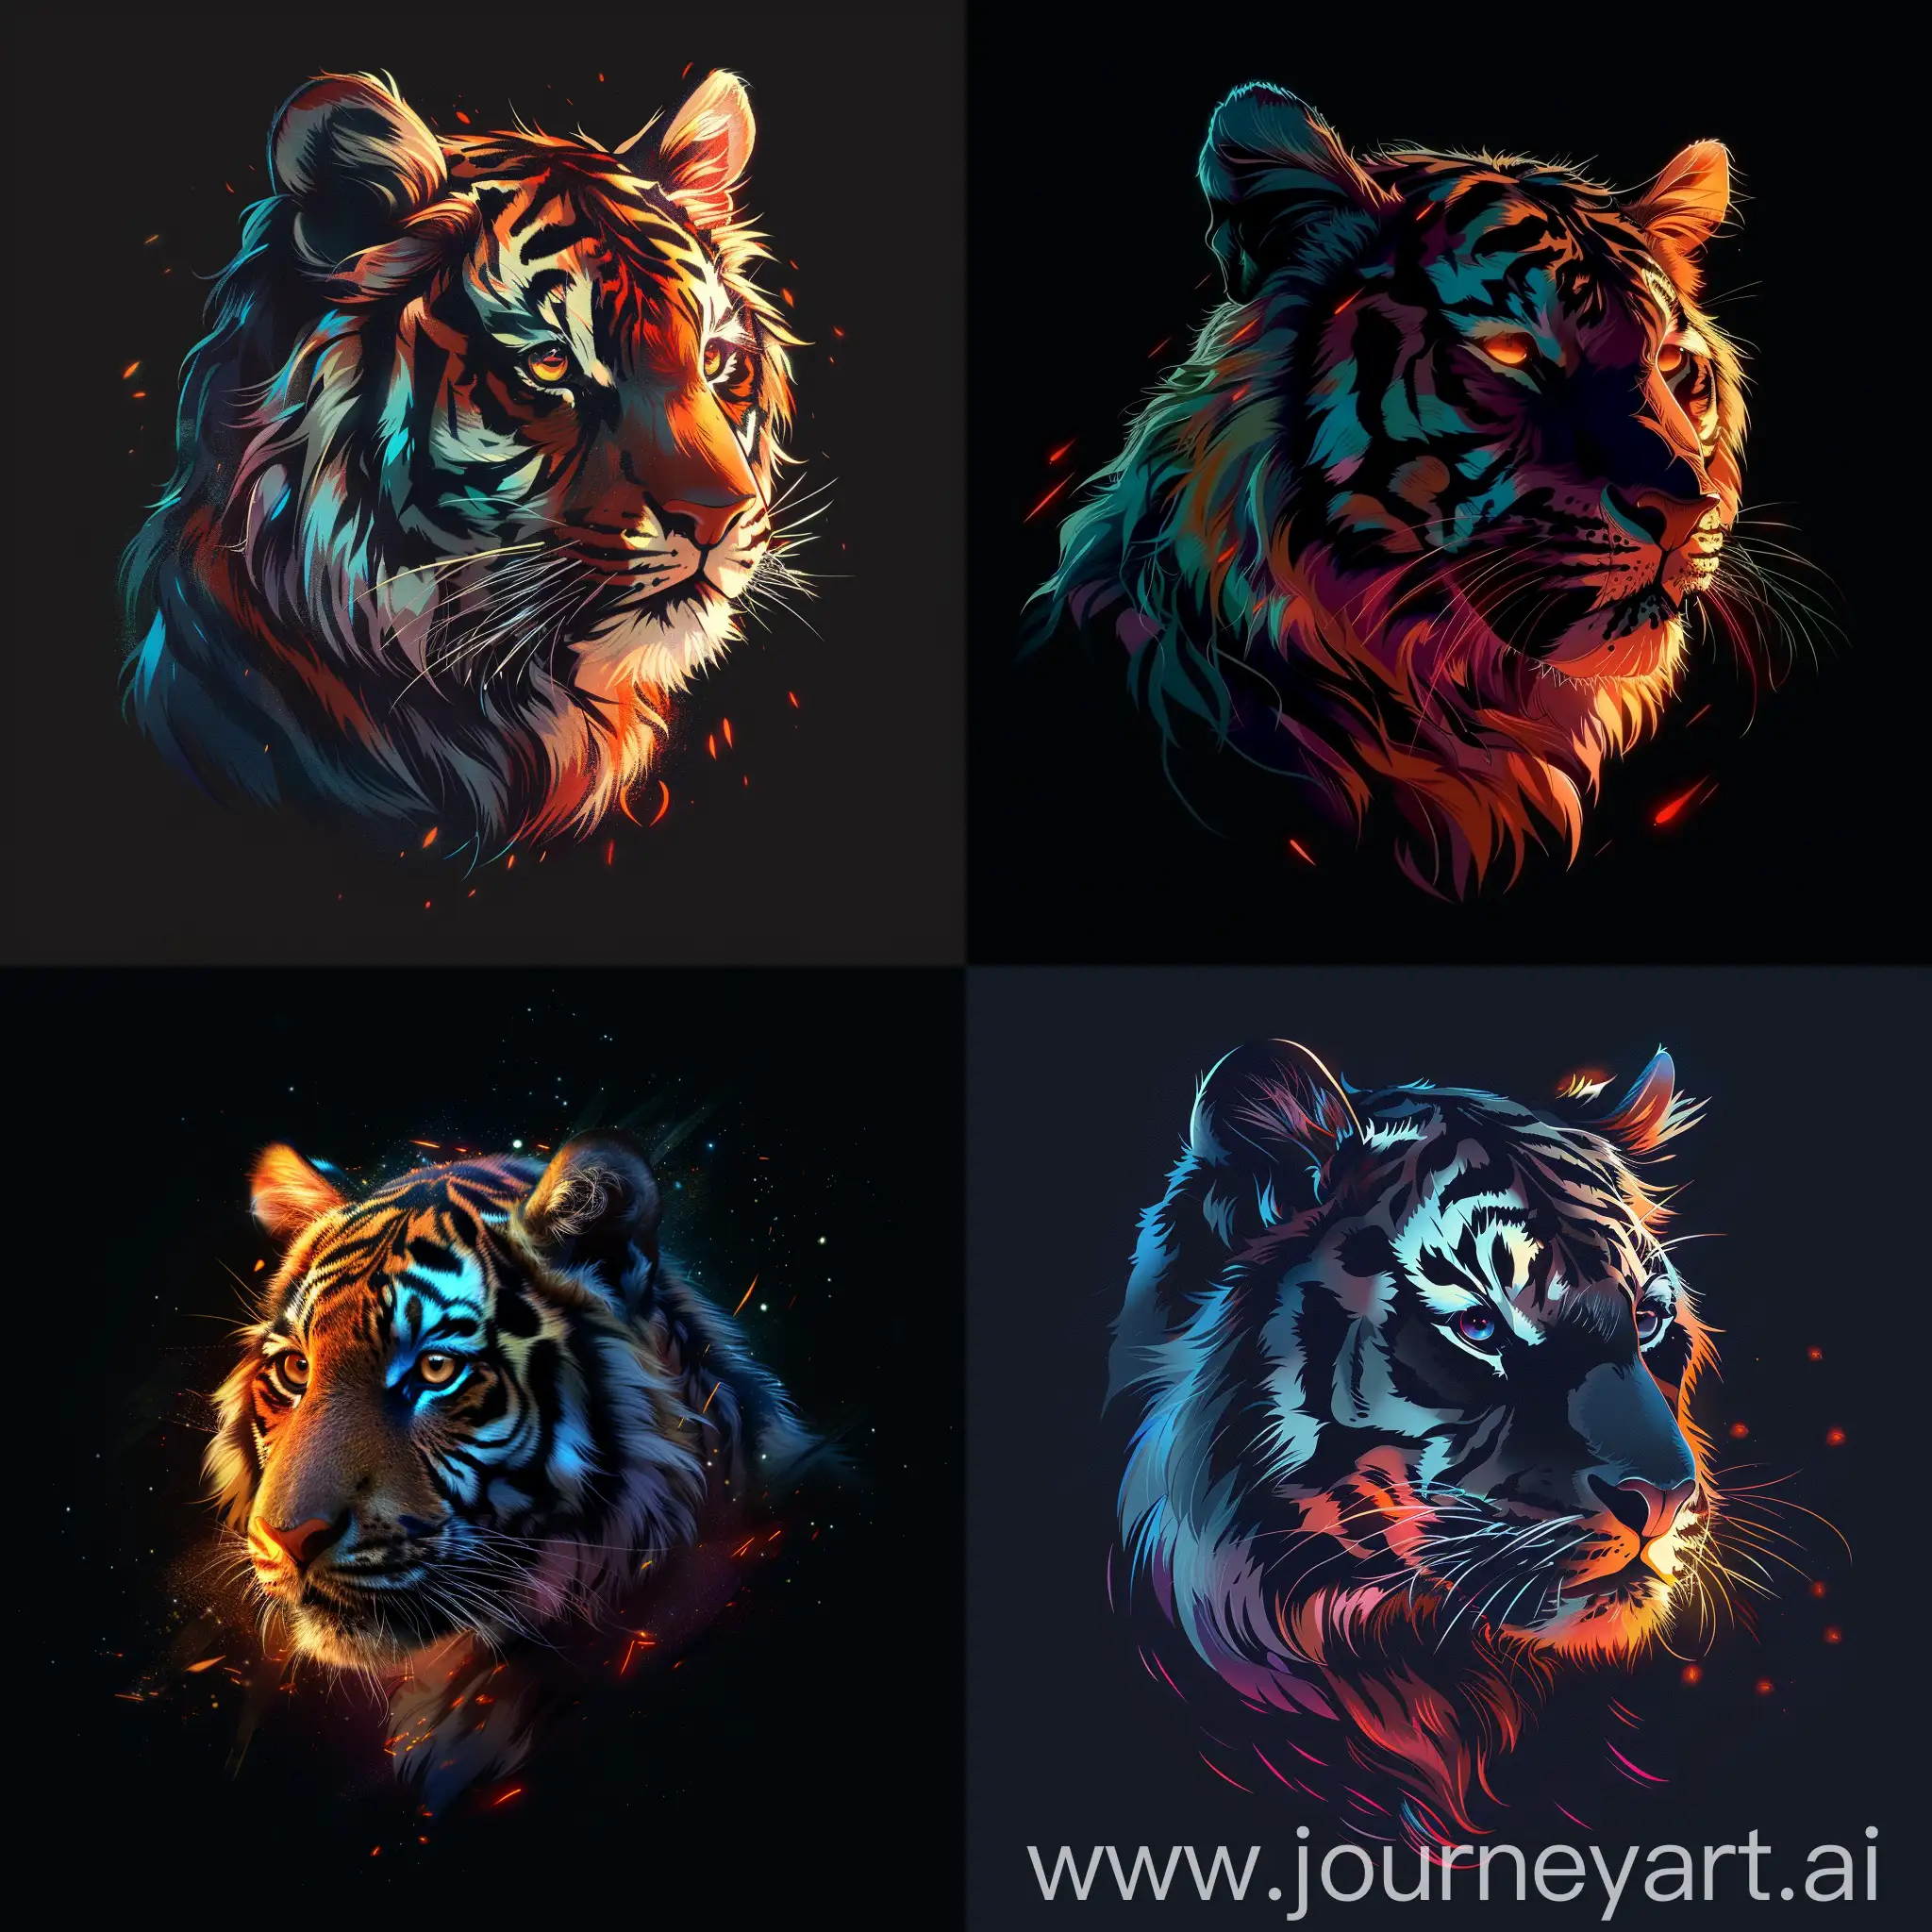 Modern crisp anime portrait of a Tiny tiger. Black background with vivid colors and glowing orange